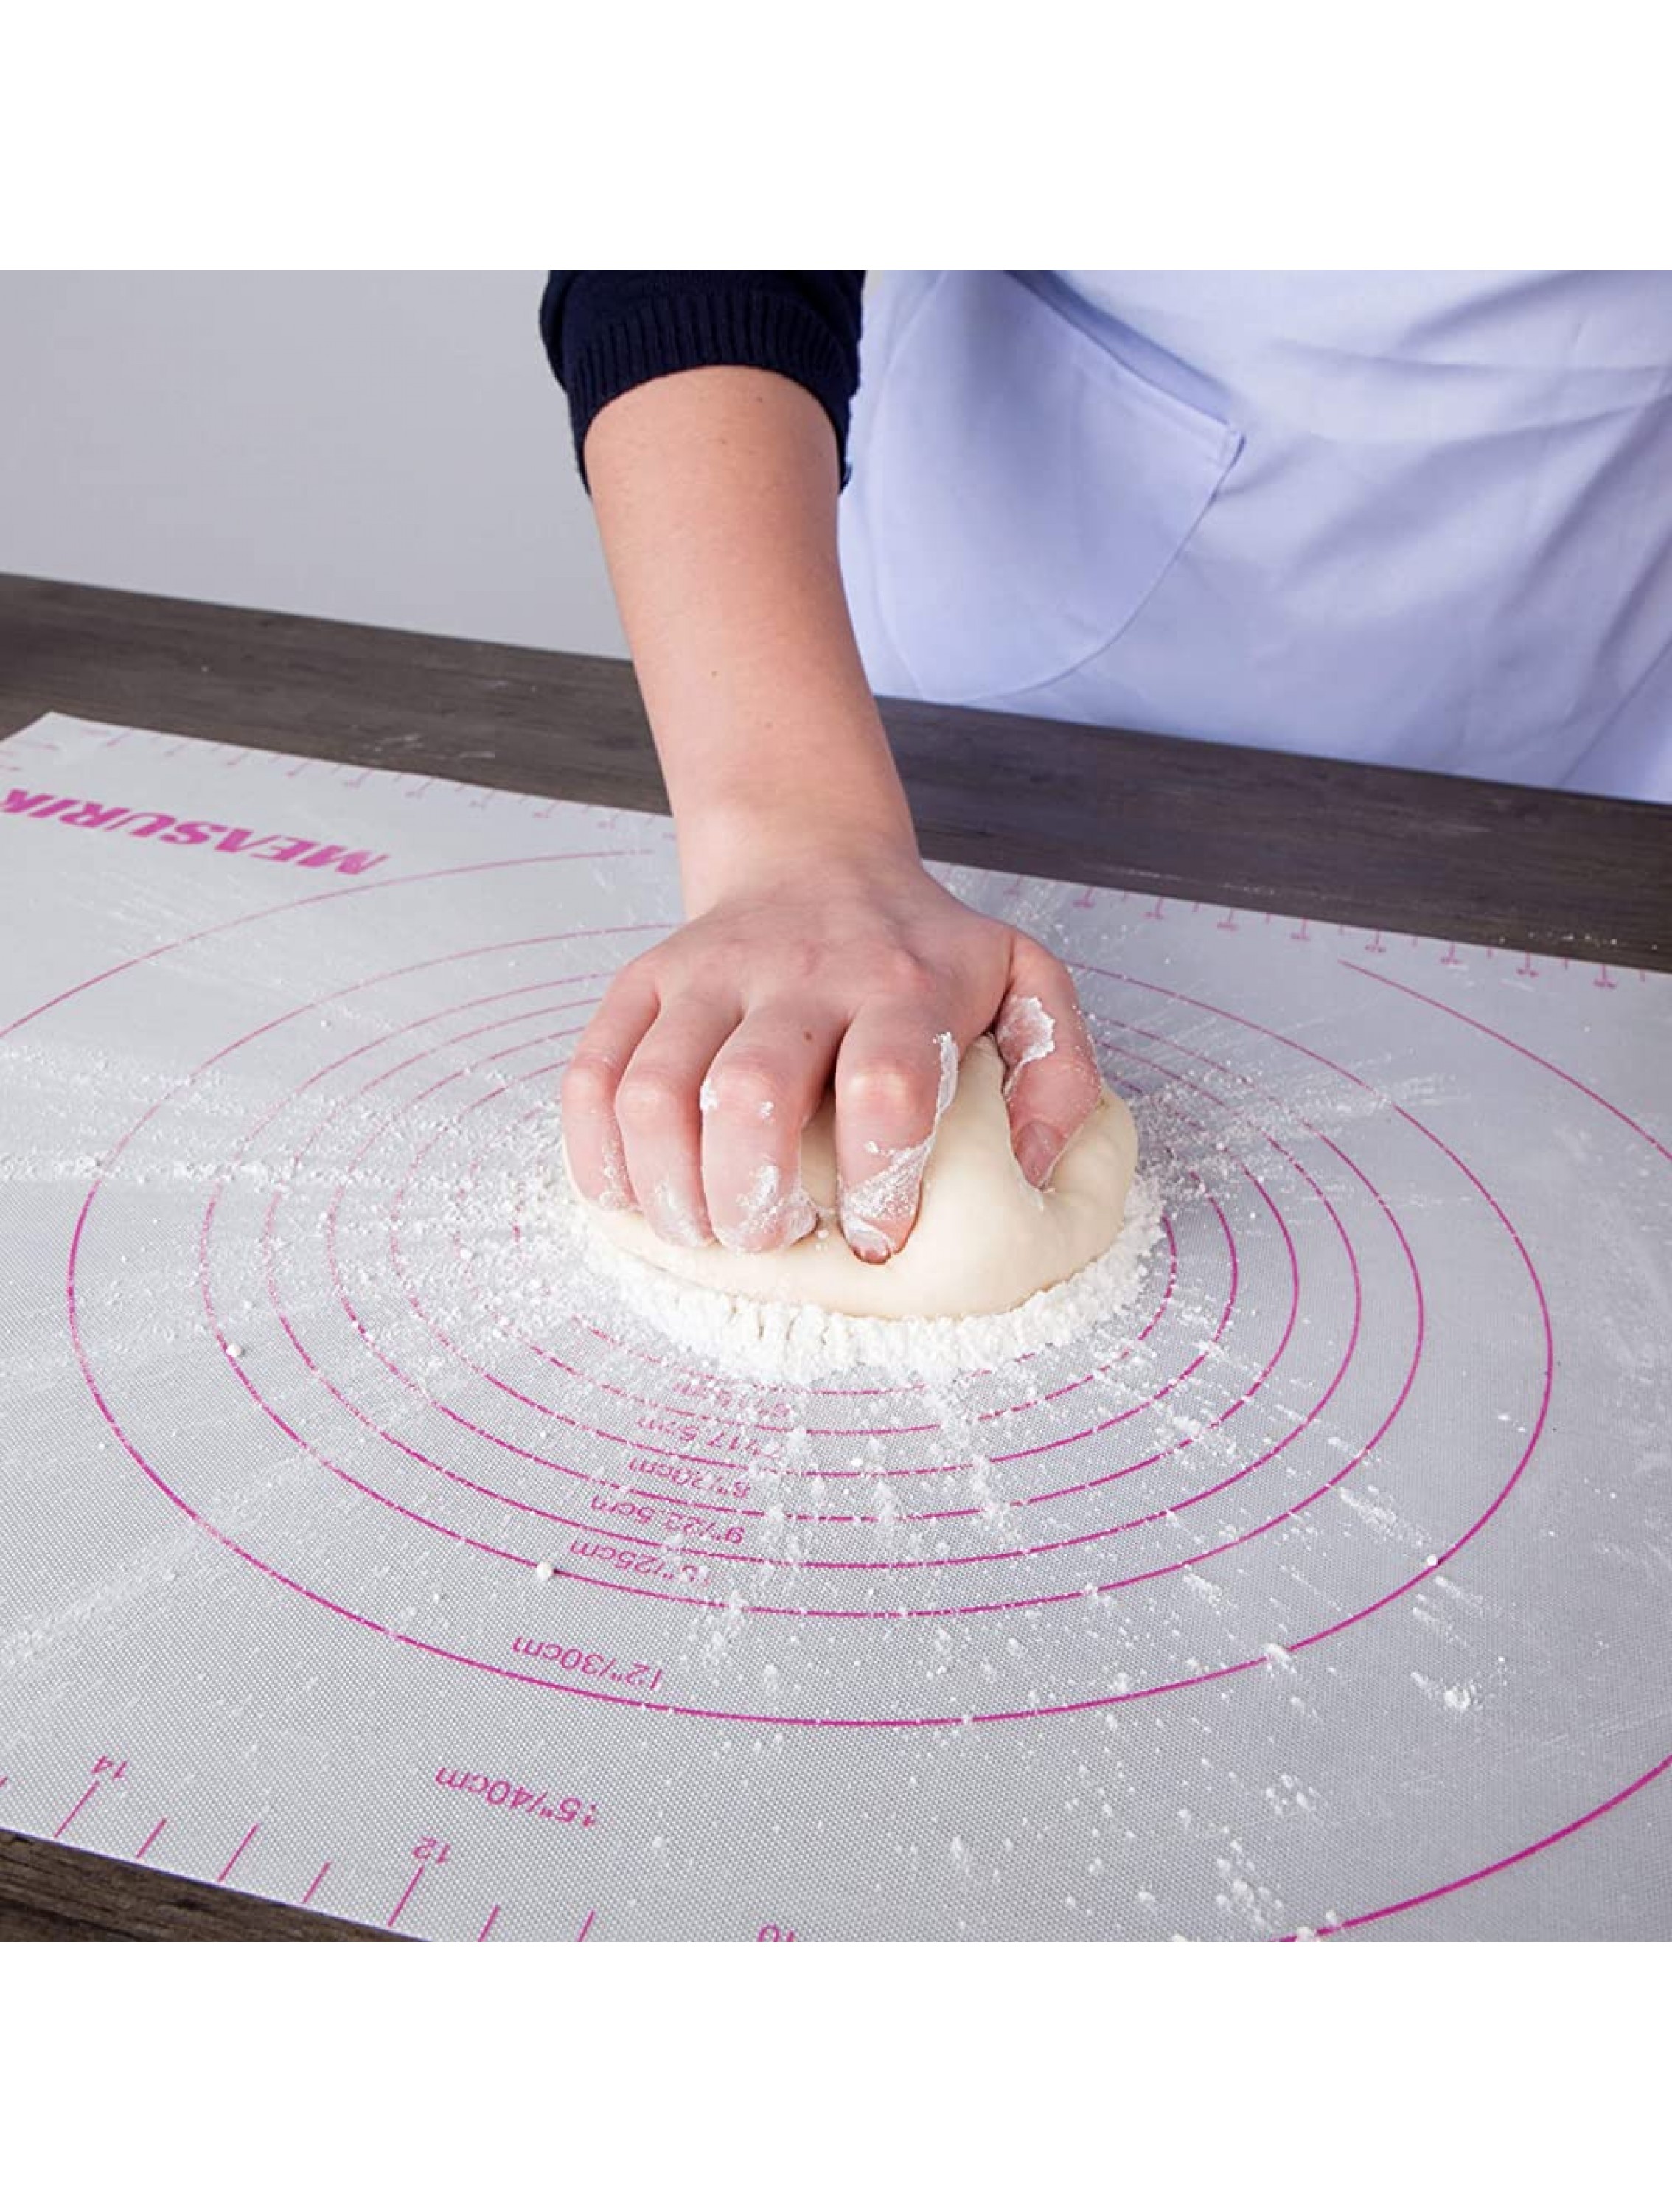 Measurik Extra Large Silicone Pastry Mat Non-Stick 16''W24''L Silicone Baking Mat with Temperature and Measurement Table Reusable Baking Oven Liner Sheet Food Grade and BPA Free - BUP7IXC0U